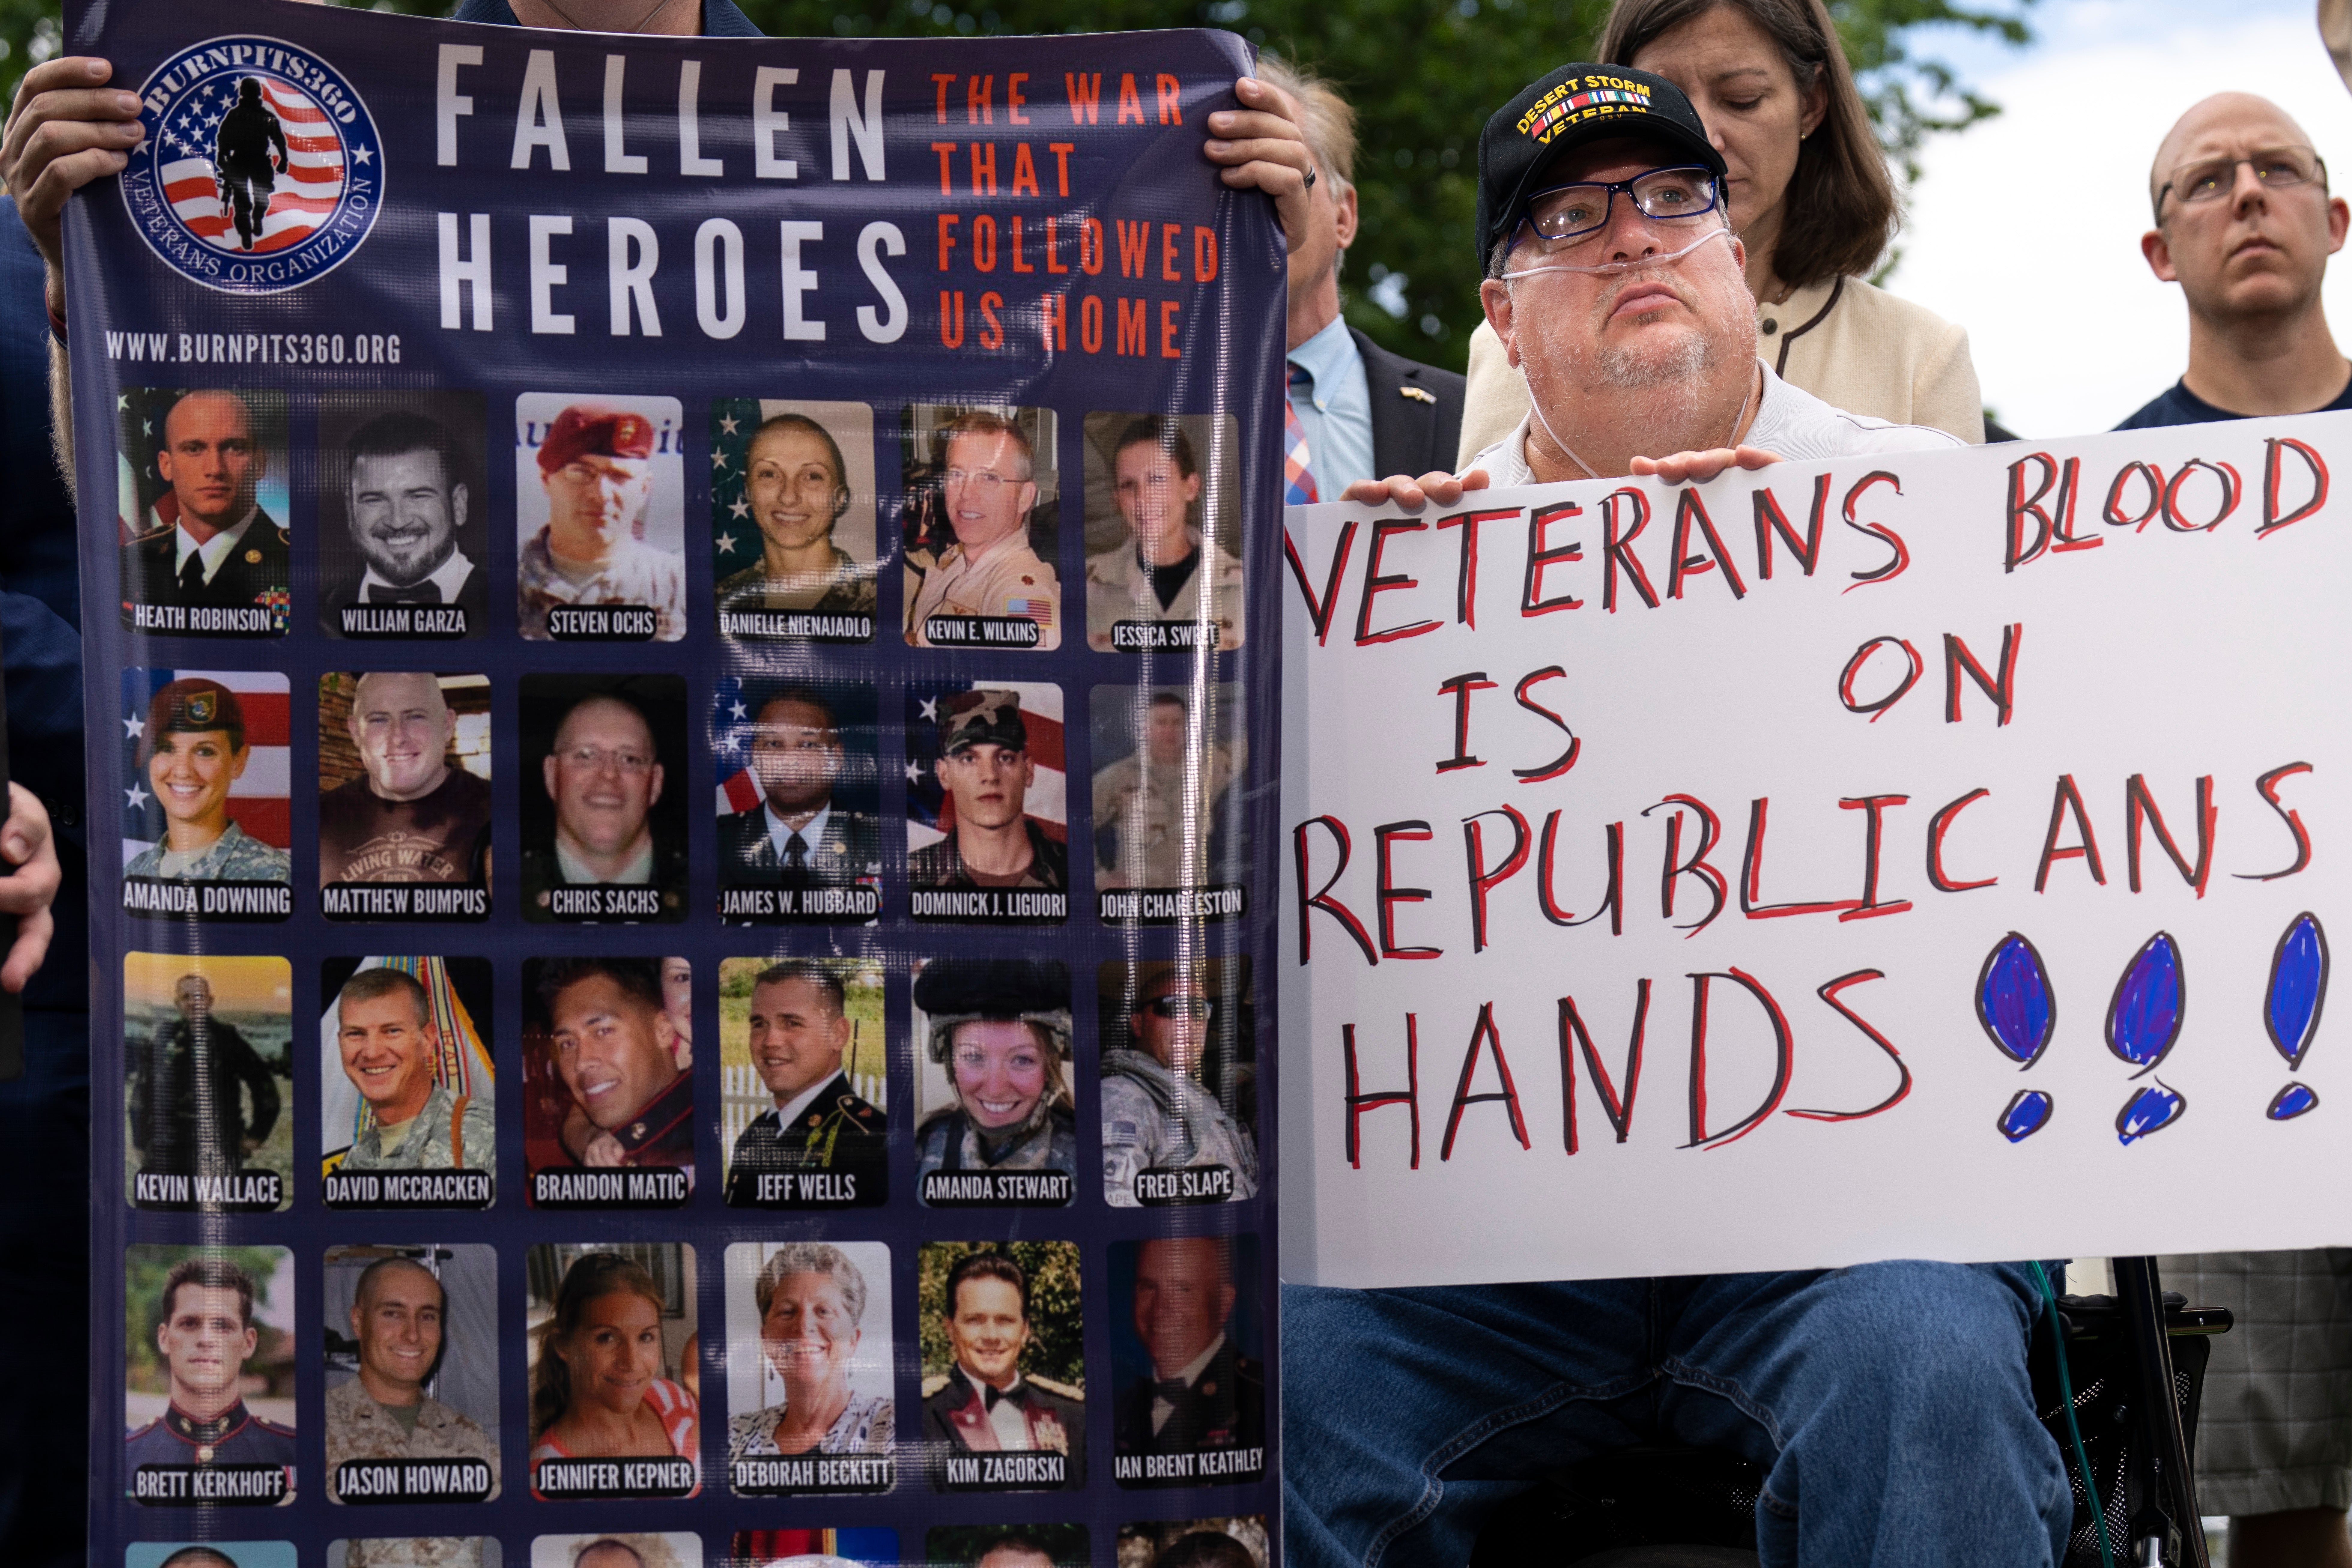 Veterans and advocates condemned GOP lawmakers who derailed the bill